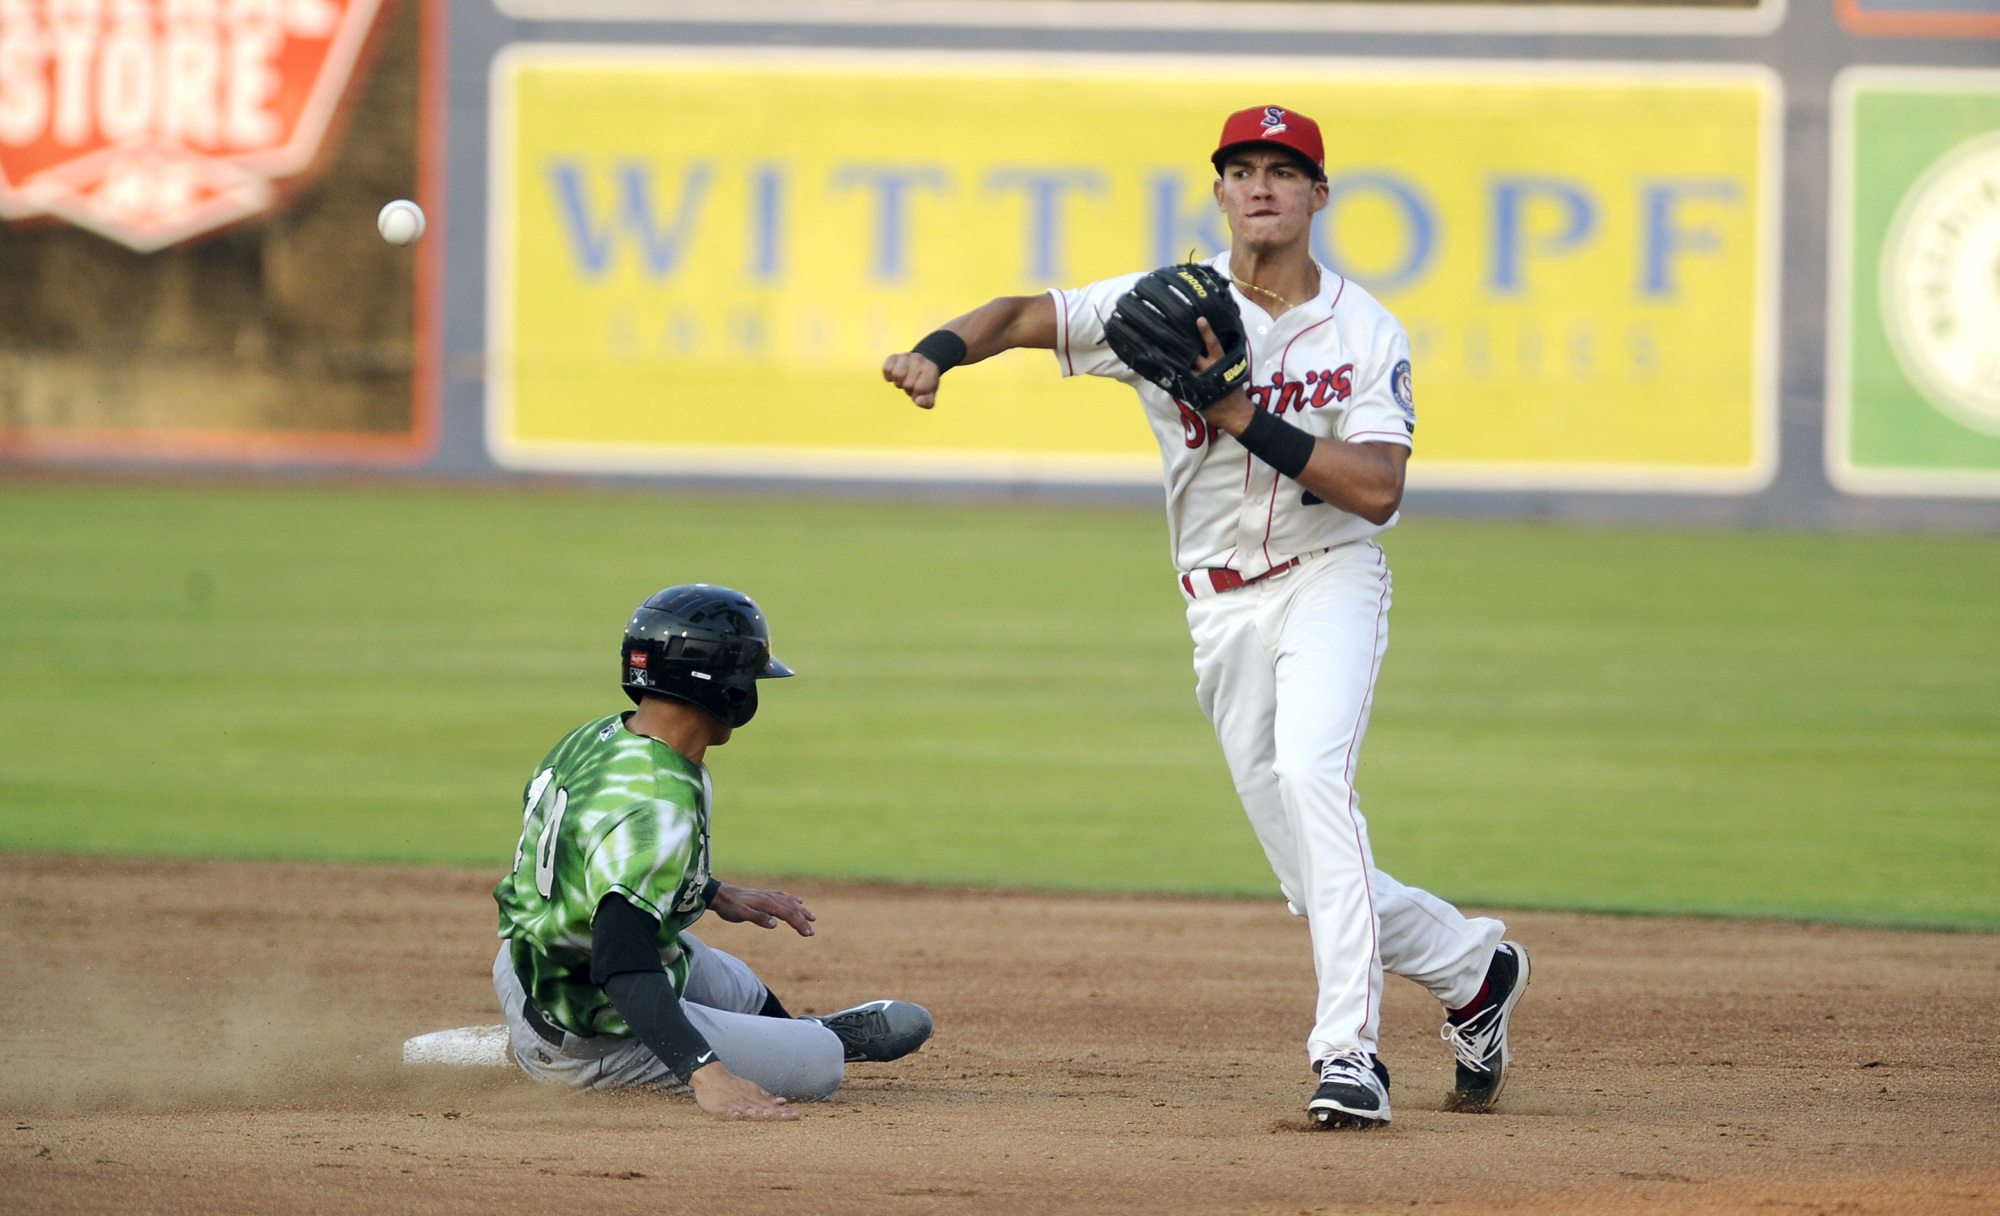 Chris Seise debuted for the Indians August 3. Photo courtesy James Snook